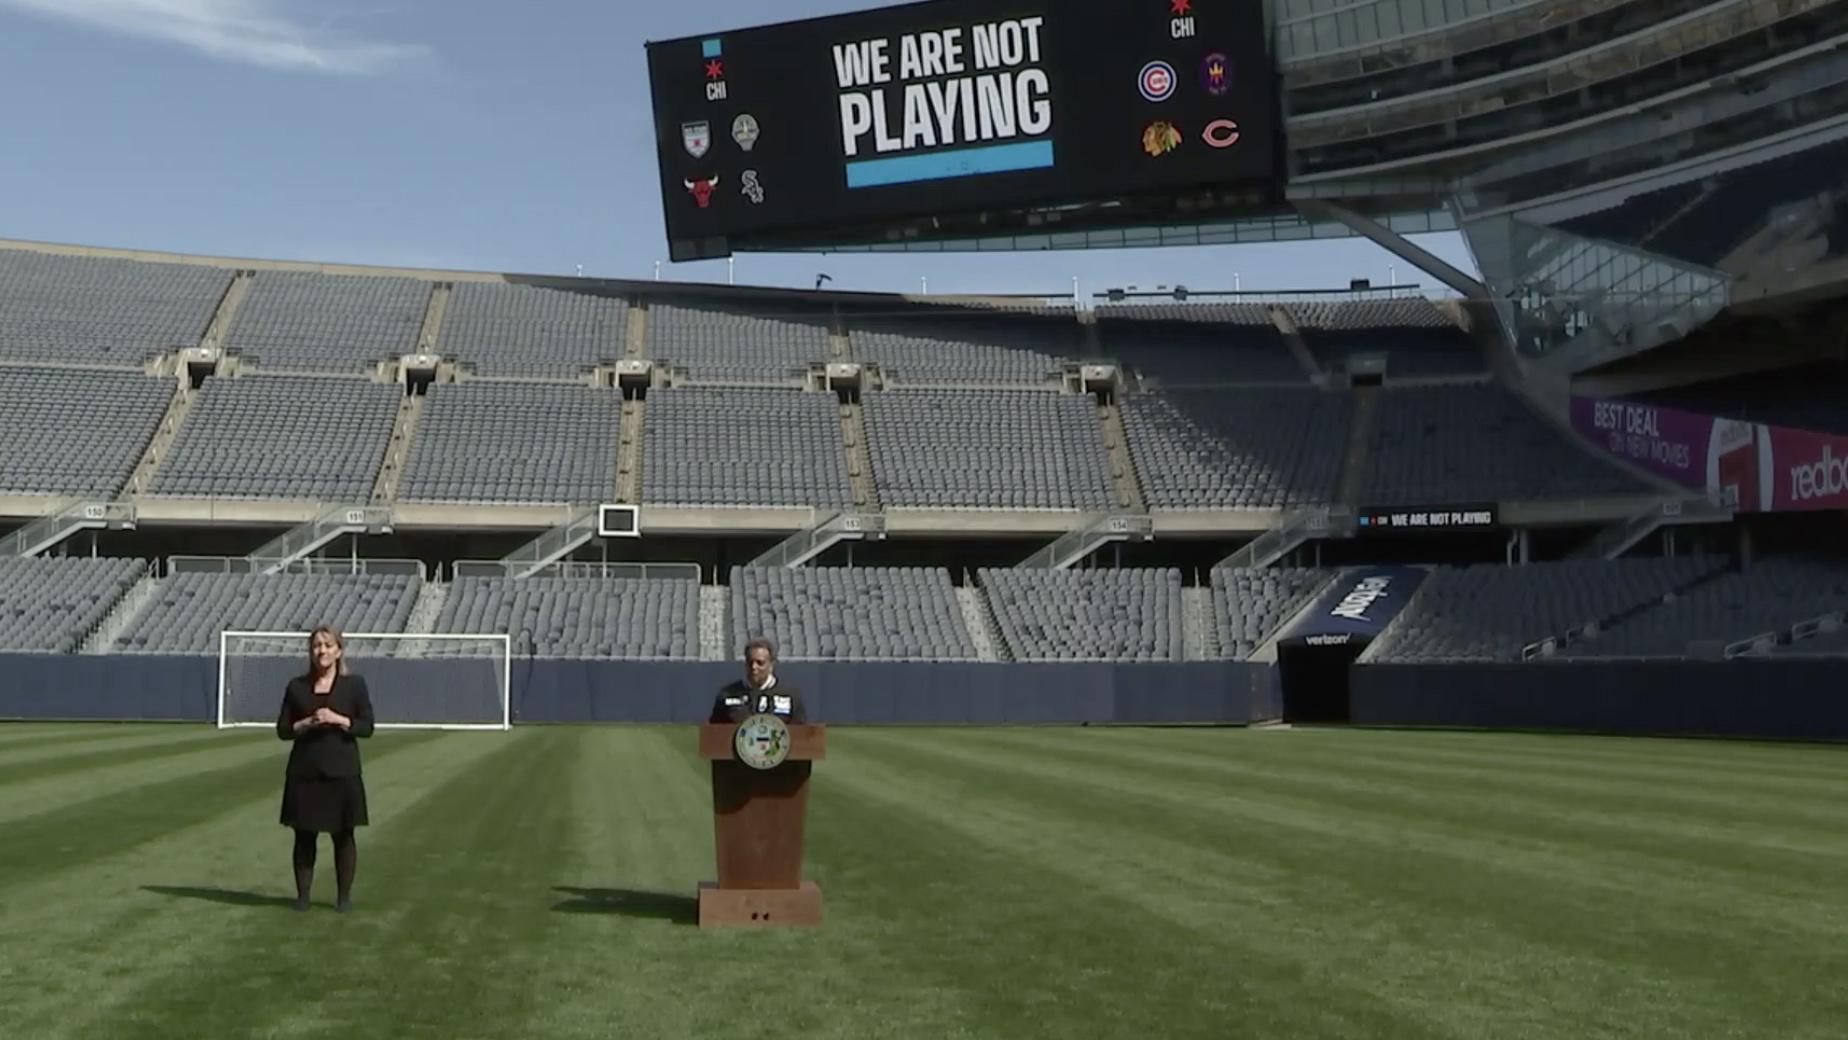 Mayor Lori Lightfoot teams up with the city’s professional sports teams to launch a new campaign, “We Are Not Playing,” to encourage residents to stay at home. Lightfoot announced the new campaign Monday in an empty Soldier Field. (Chicago Mayor’s Office / Facebook photo)